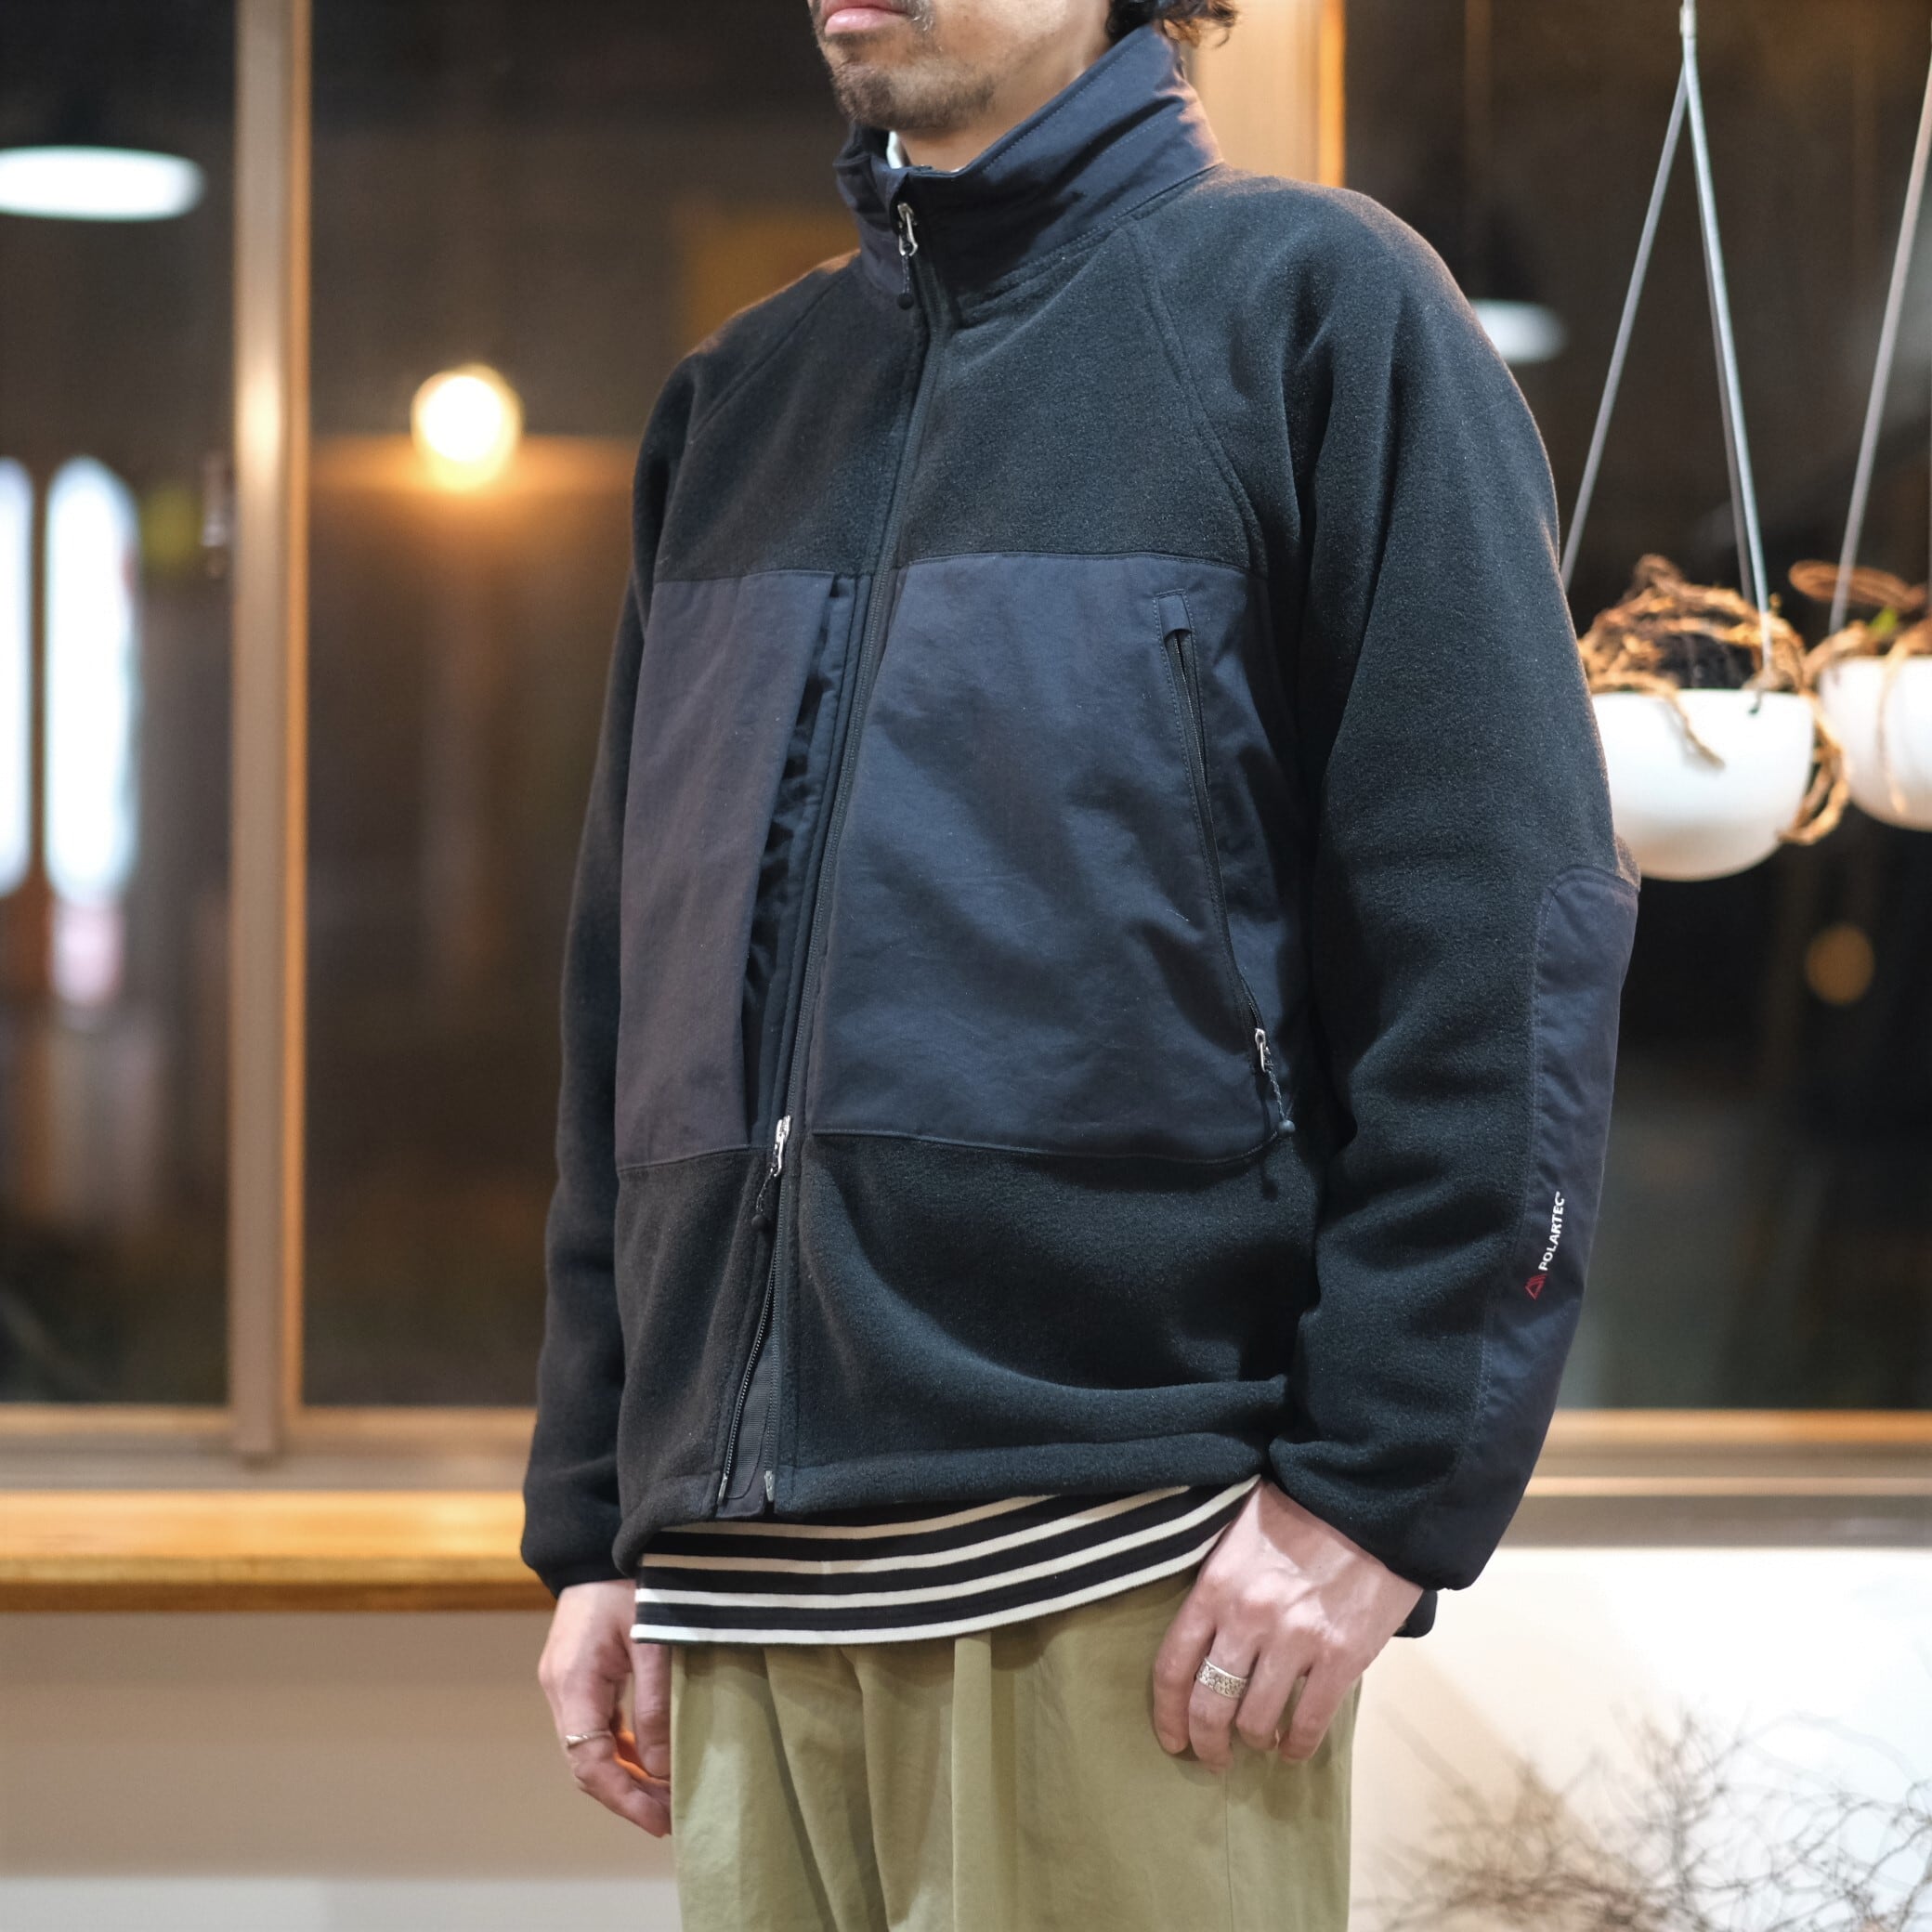 Ends and Means Tactical Fleece セットアップ 黒